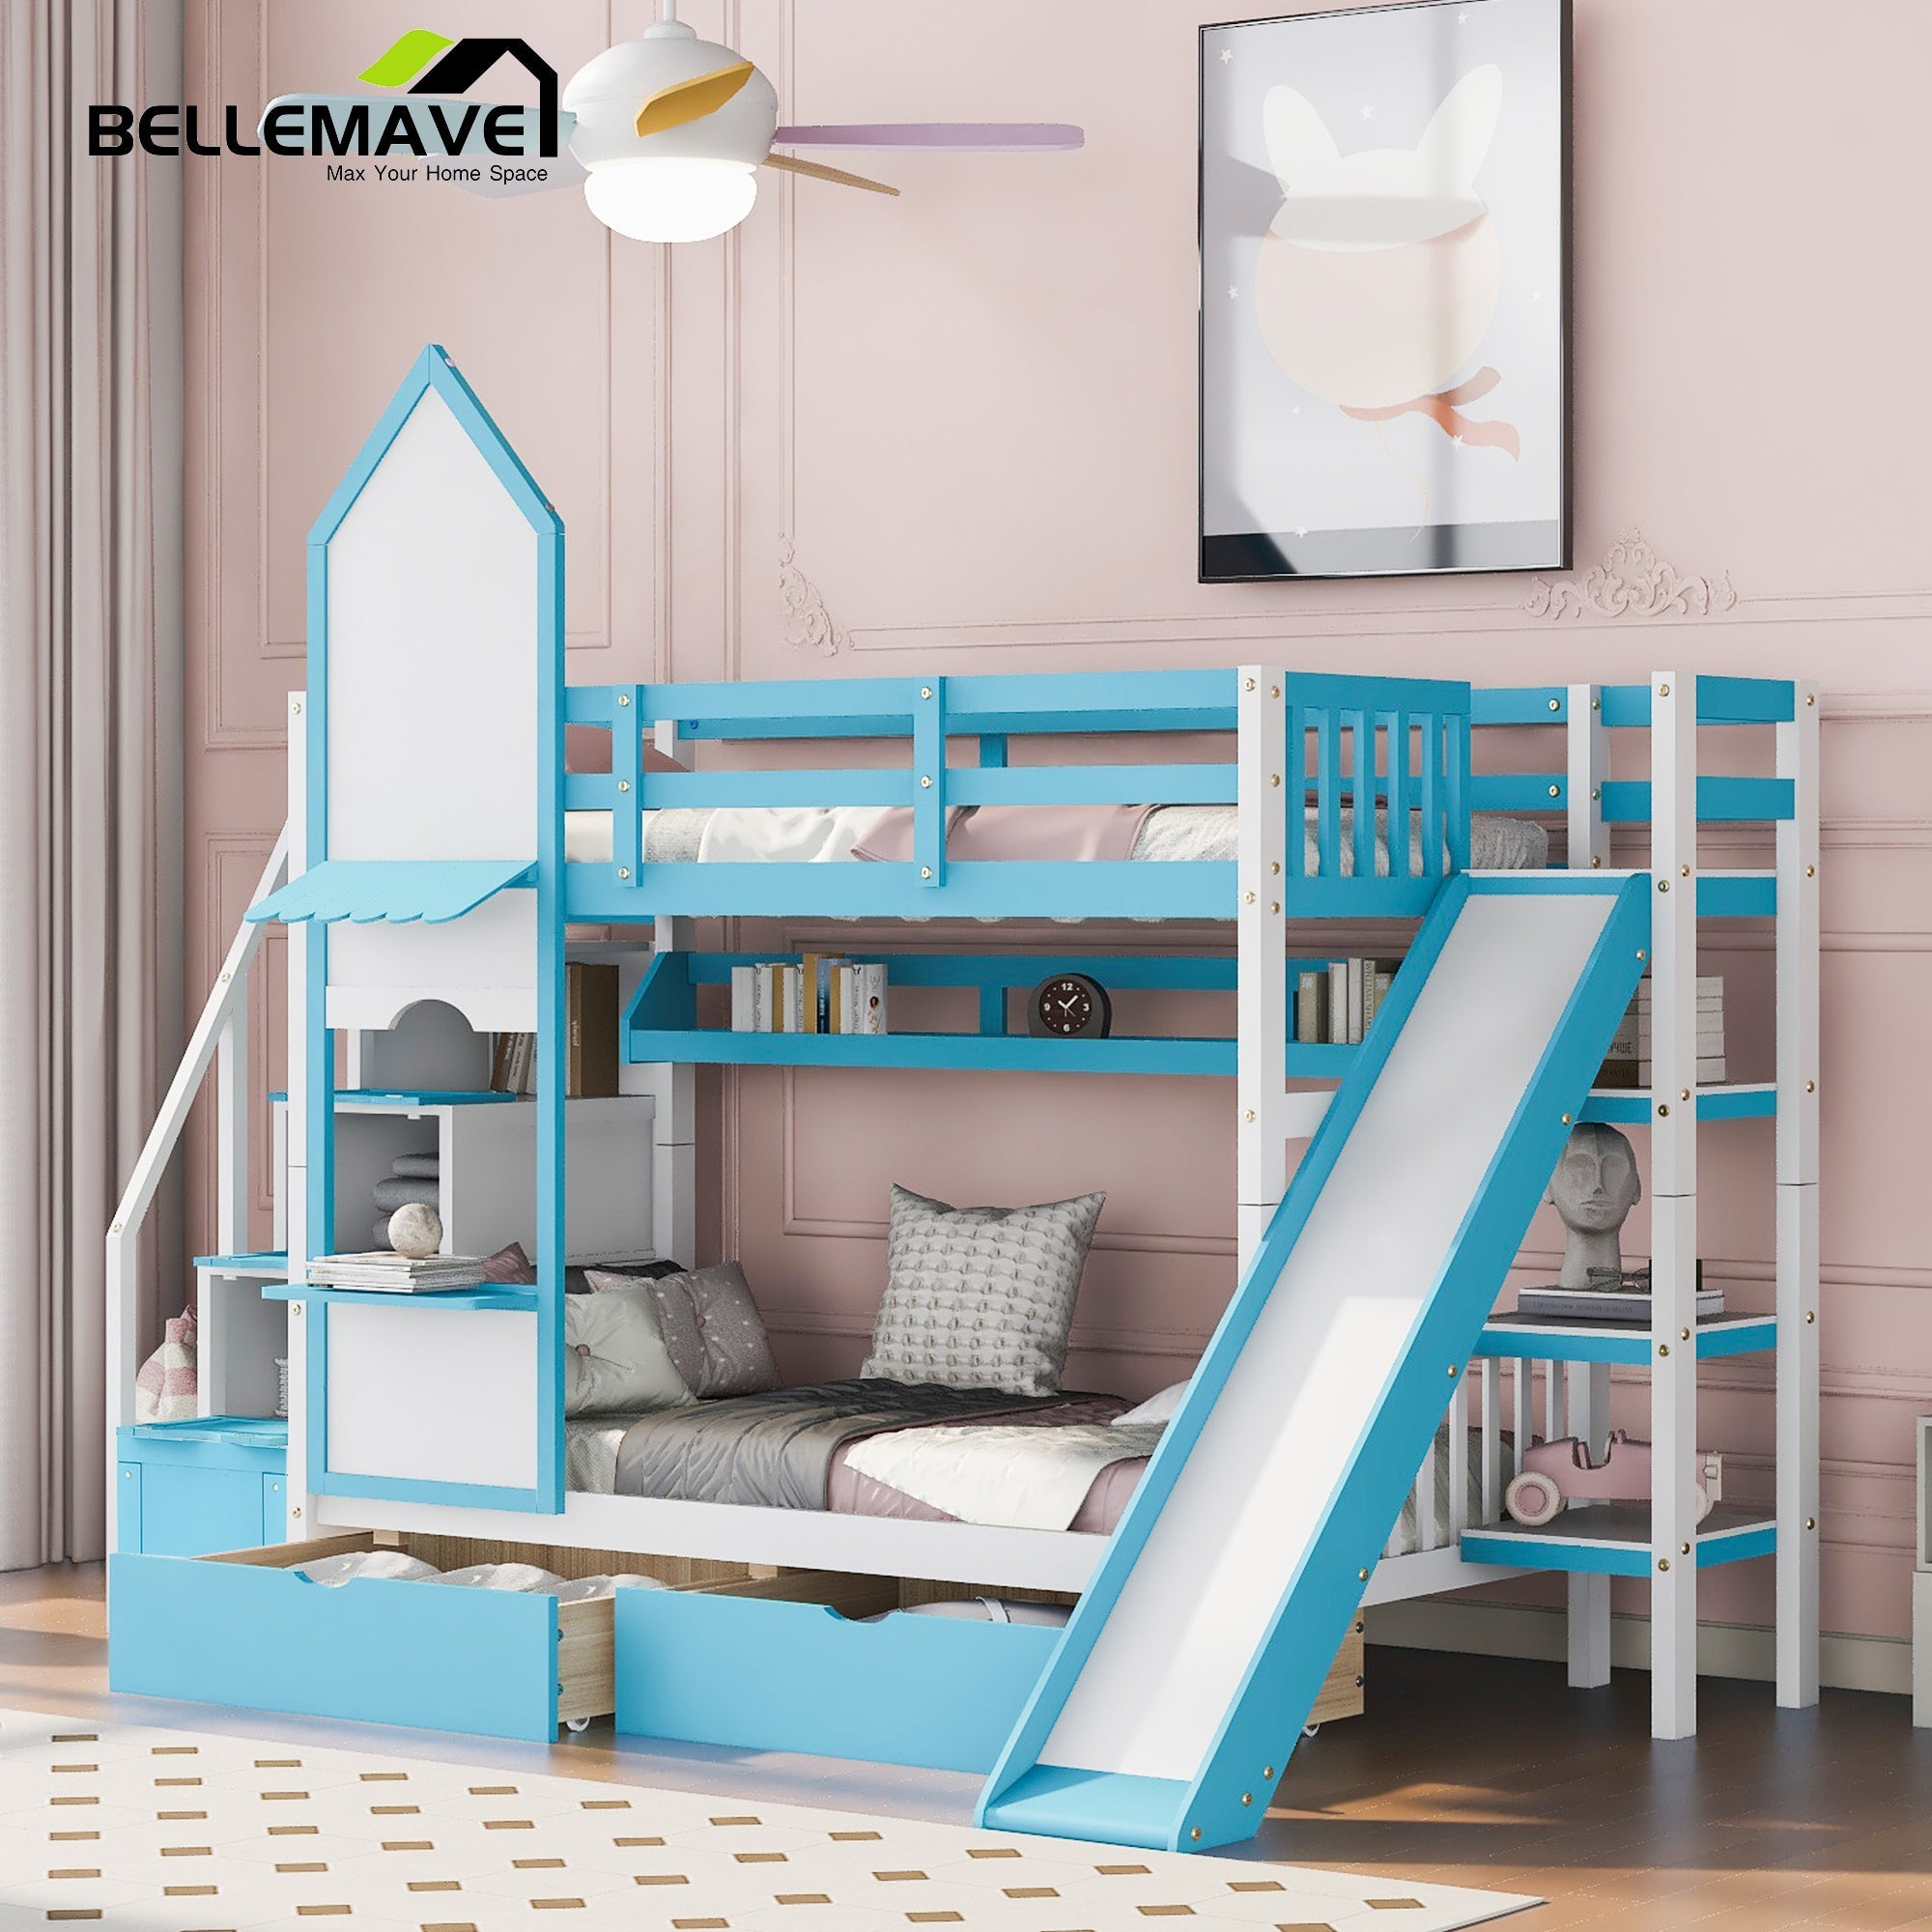 BELLEMAVE Kids Castle Bunk Bed with Storage Drawers, Shelf, Slide and Safety Guardrail, Twin over Twin Bunk Bed with Stairs, Castle Bunk Bed/Playhouse Bed for Girls, Boys, Kids(Blue)